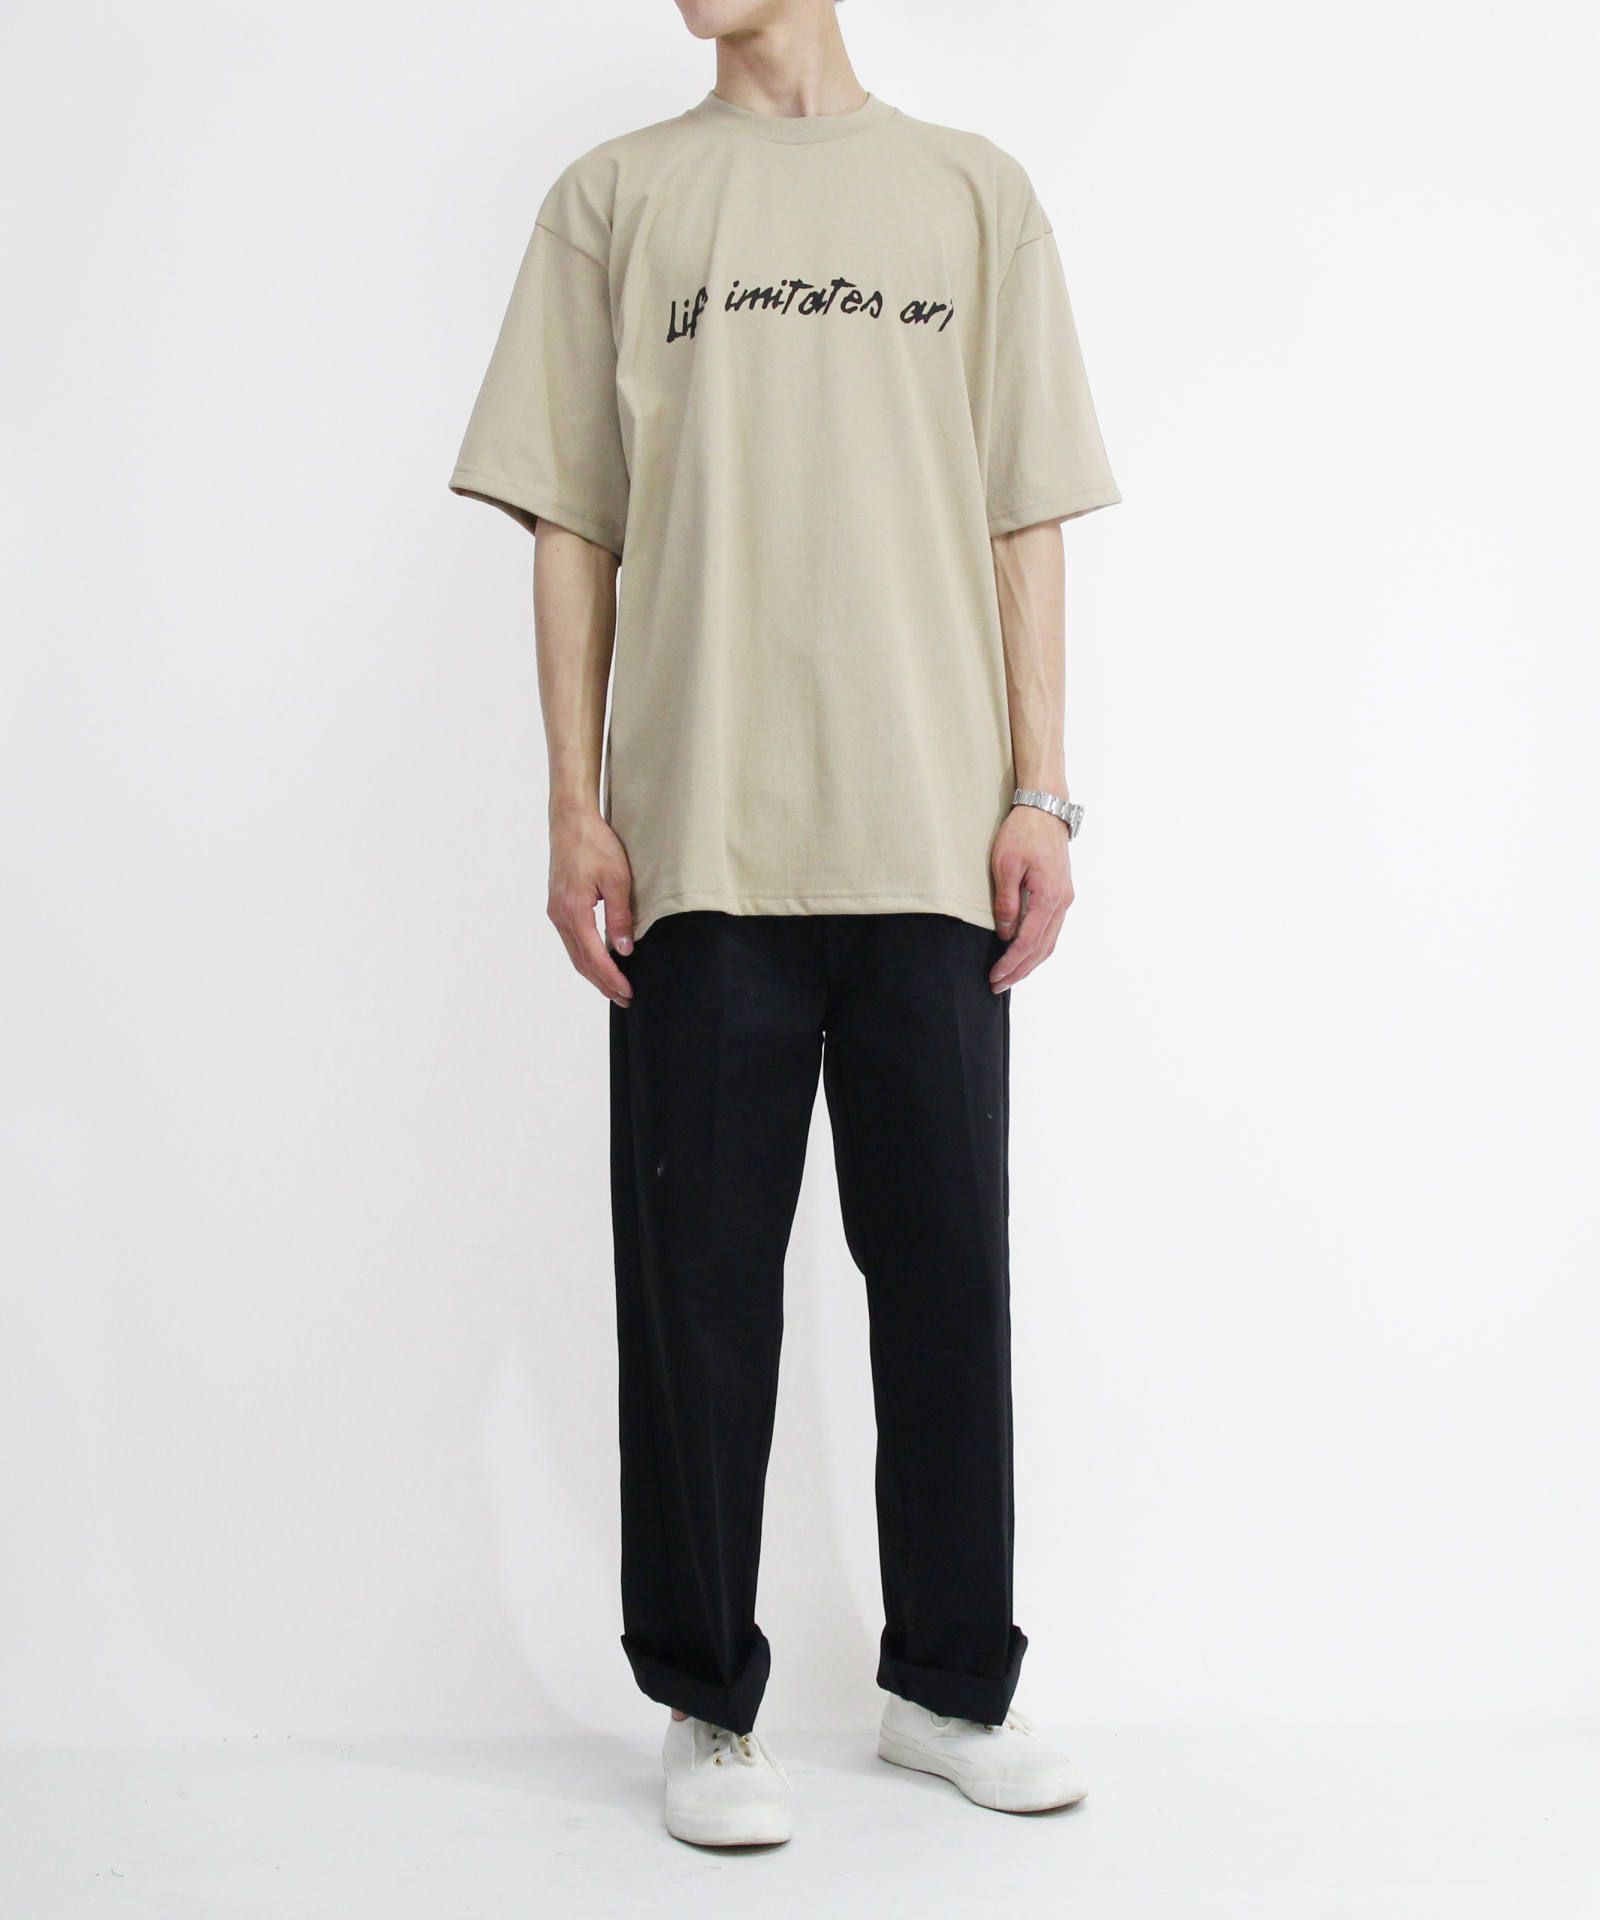 CLANE HOMME - メンズプリントTシャツ - BRUSH WRITING T/S - WHITE